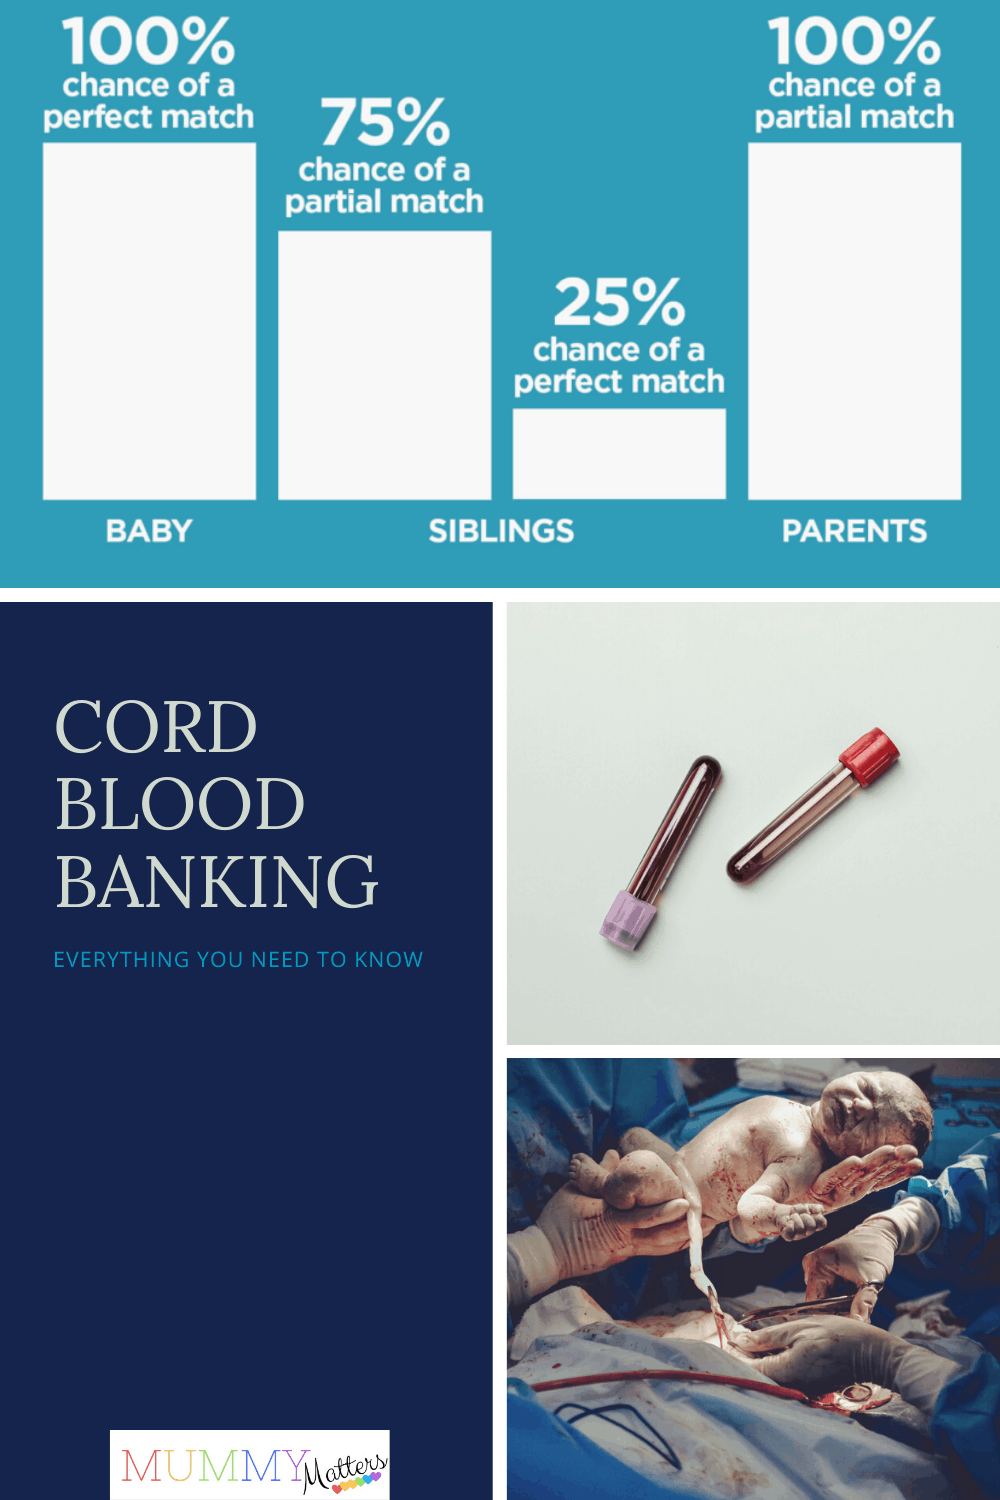 To help you make an informed decision about cord blood banking. Here, you’ll find everything you need to know about stem cells and the latest research.